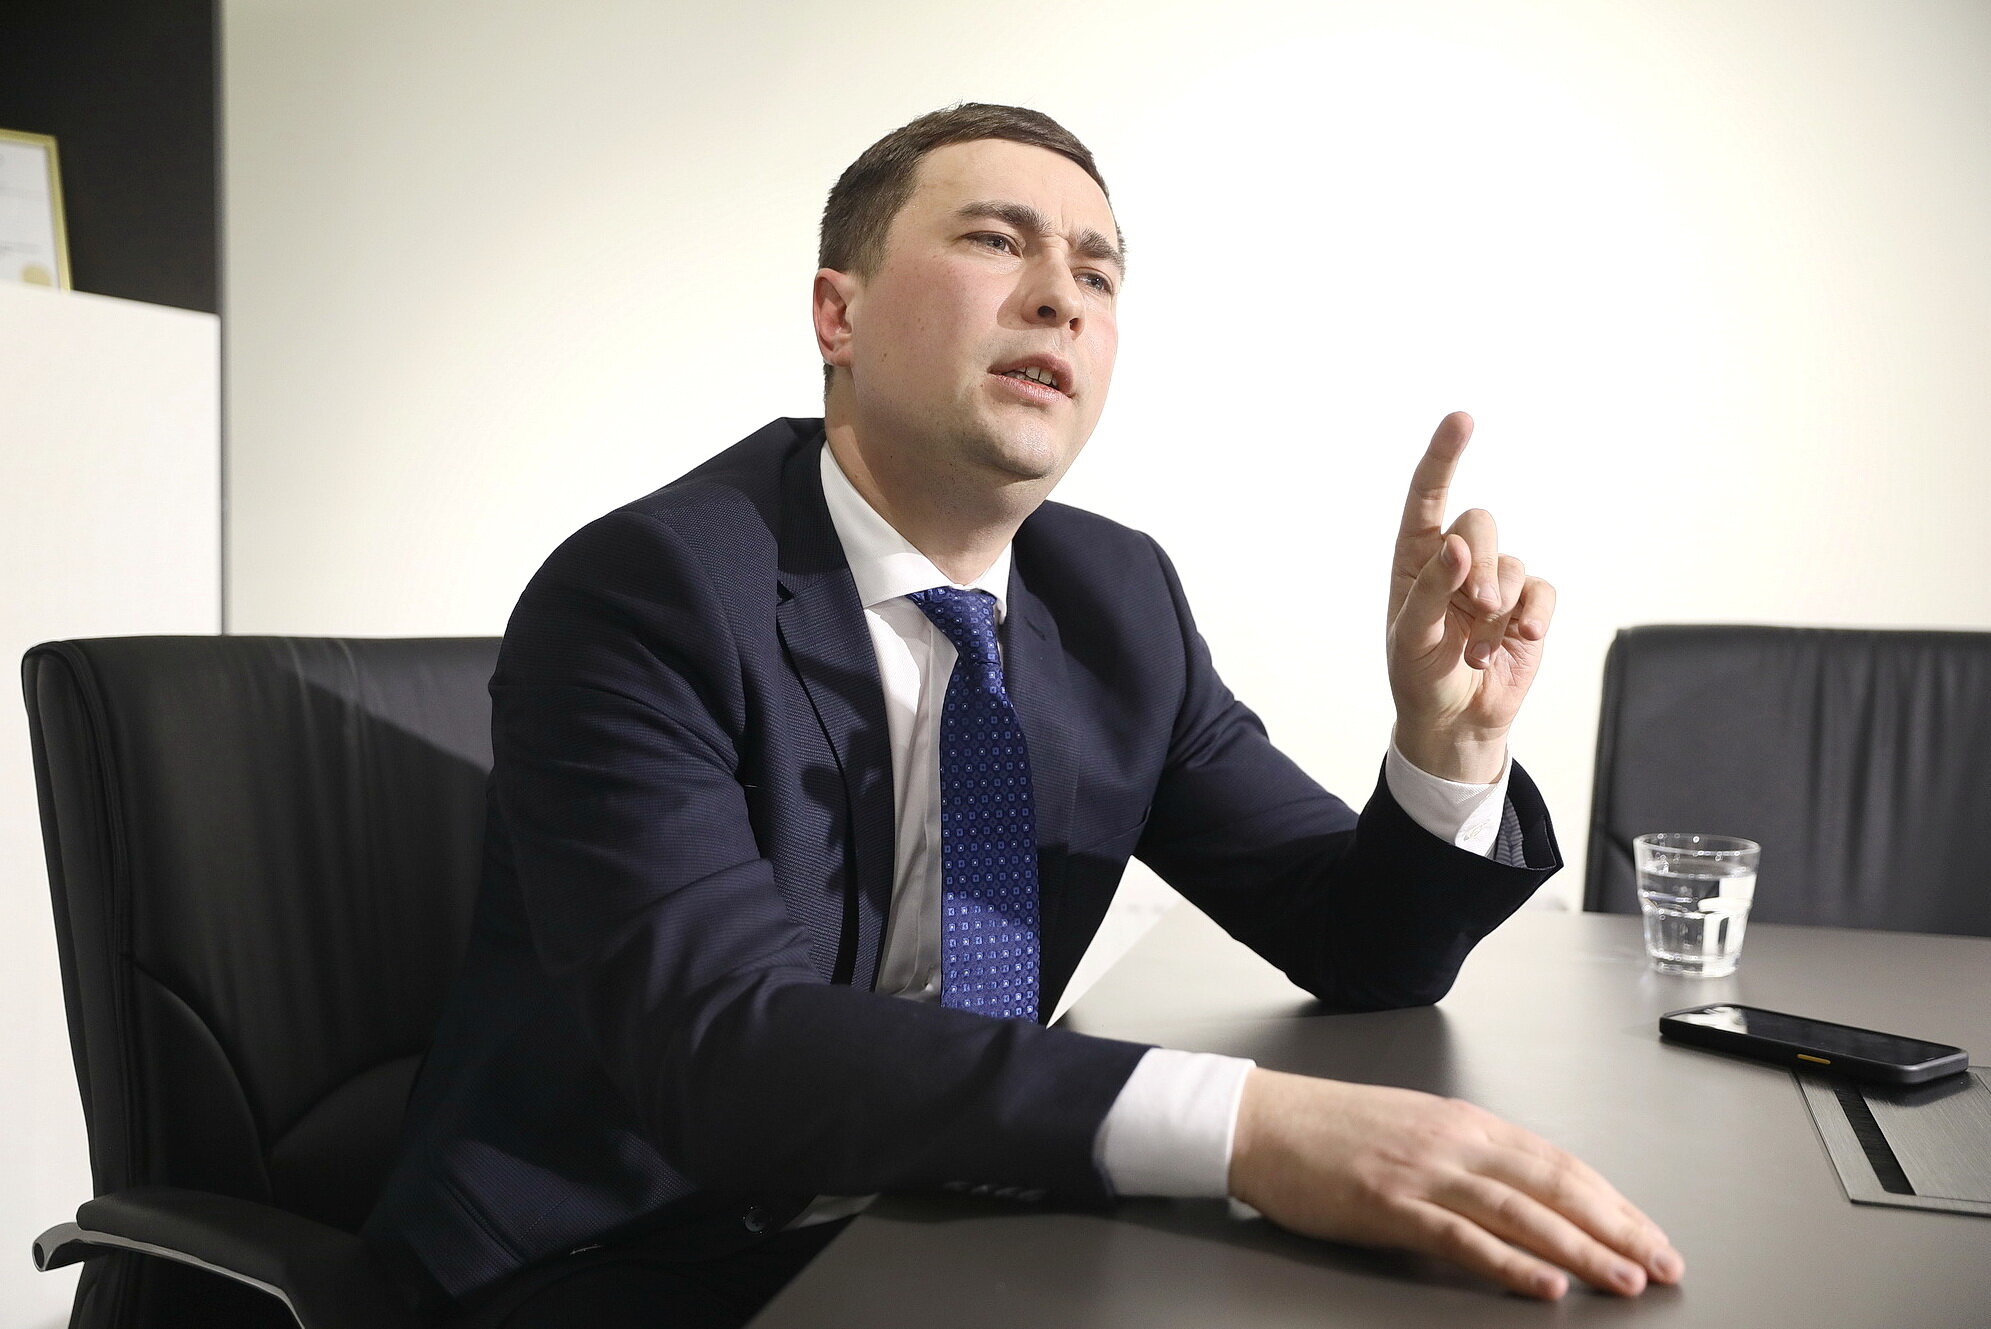 Roman Leshchenko, the new agriculture minister of Ukraine, speaks with the Kyiv Post on Jan. 27, 2021.